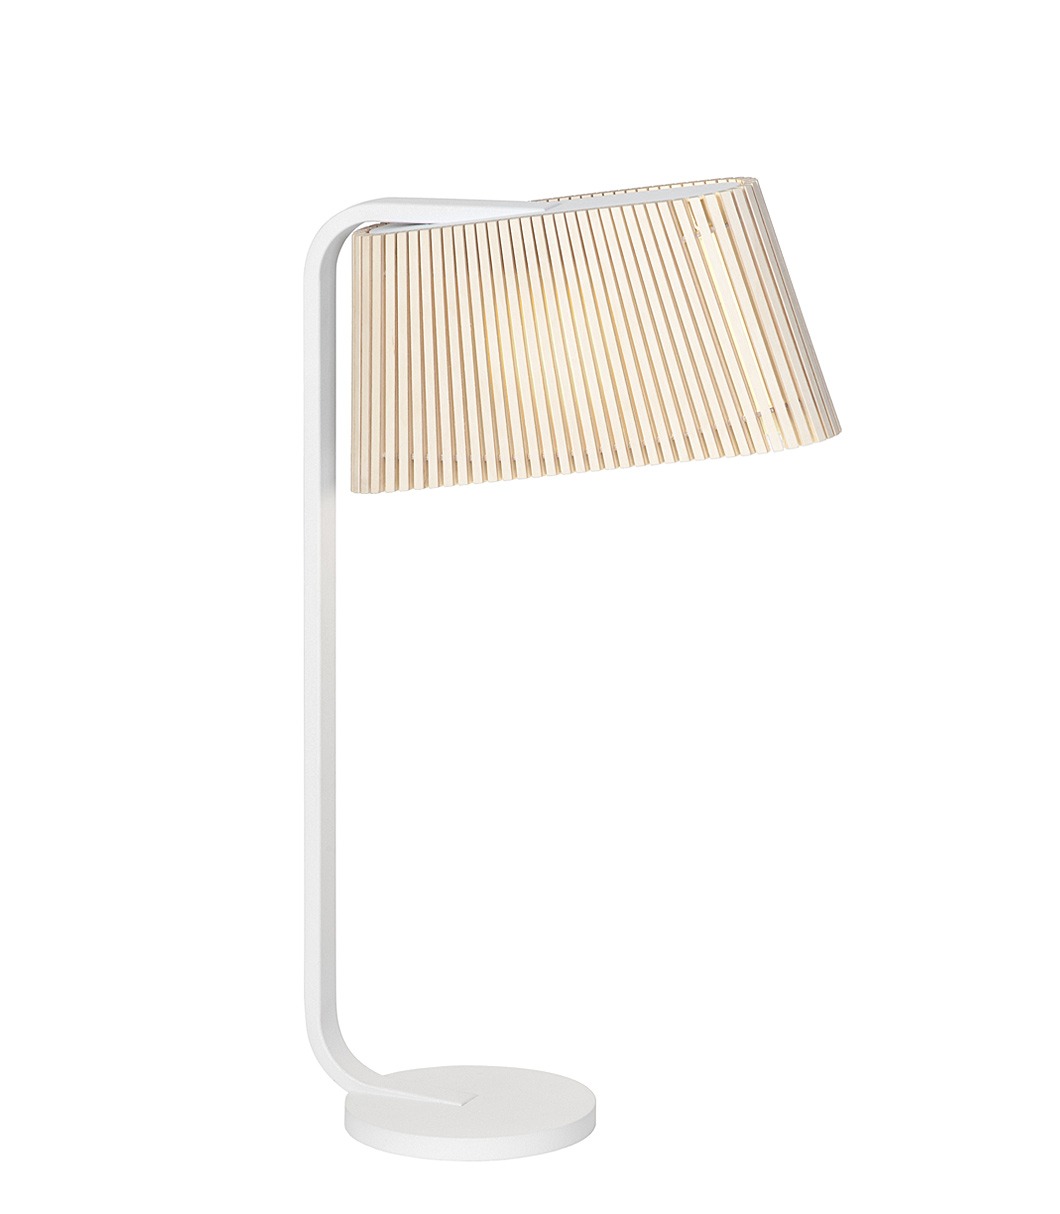 Owalo 7020 table lamp is available in natural birch